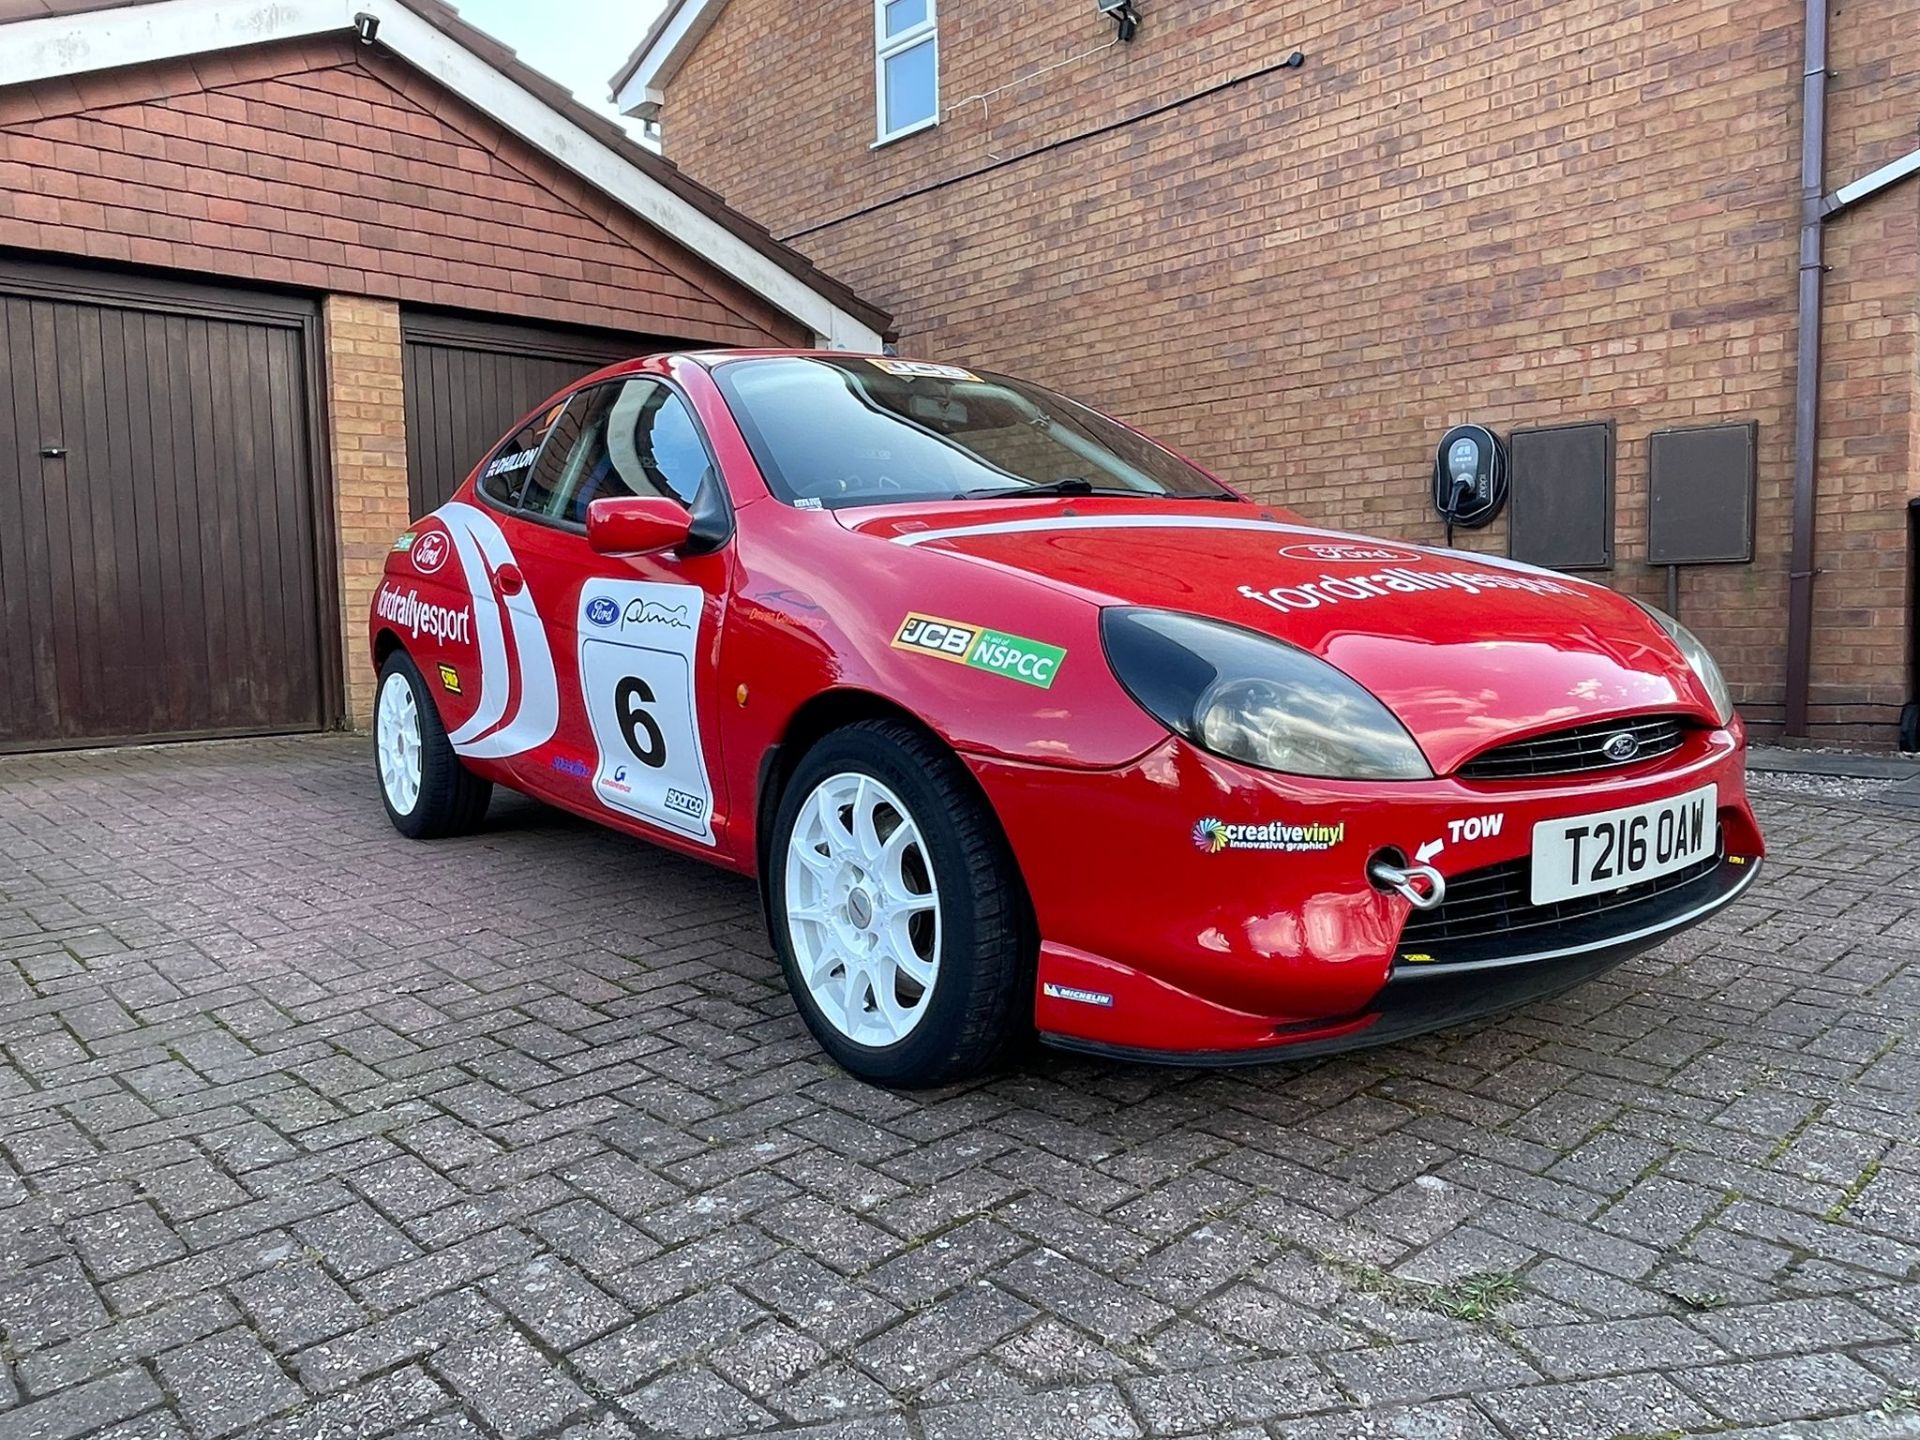 1999 FORD PUMA 1.7 16V RED COUPE, RALLY LIVERY, MOTORSPORTS WEIGHT REDUCTION *NO VAT*